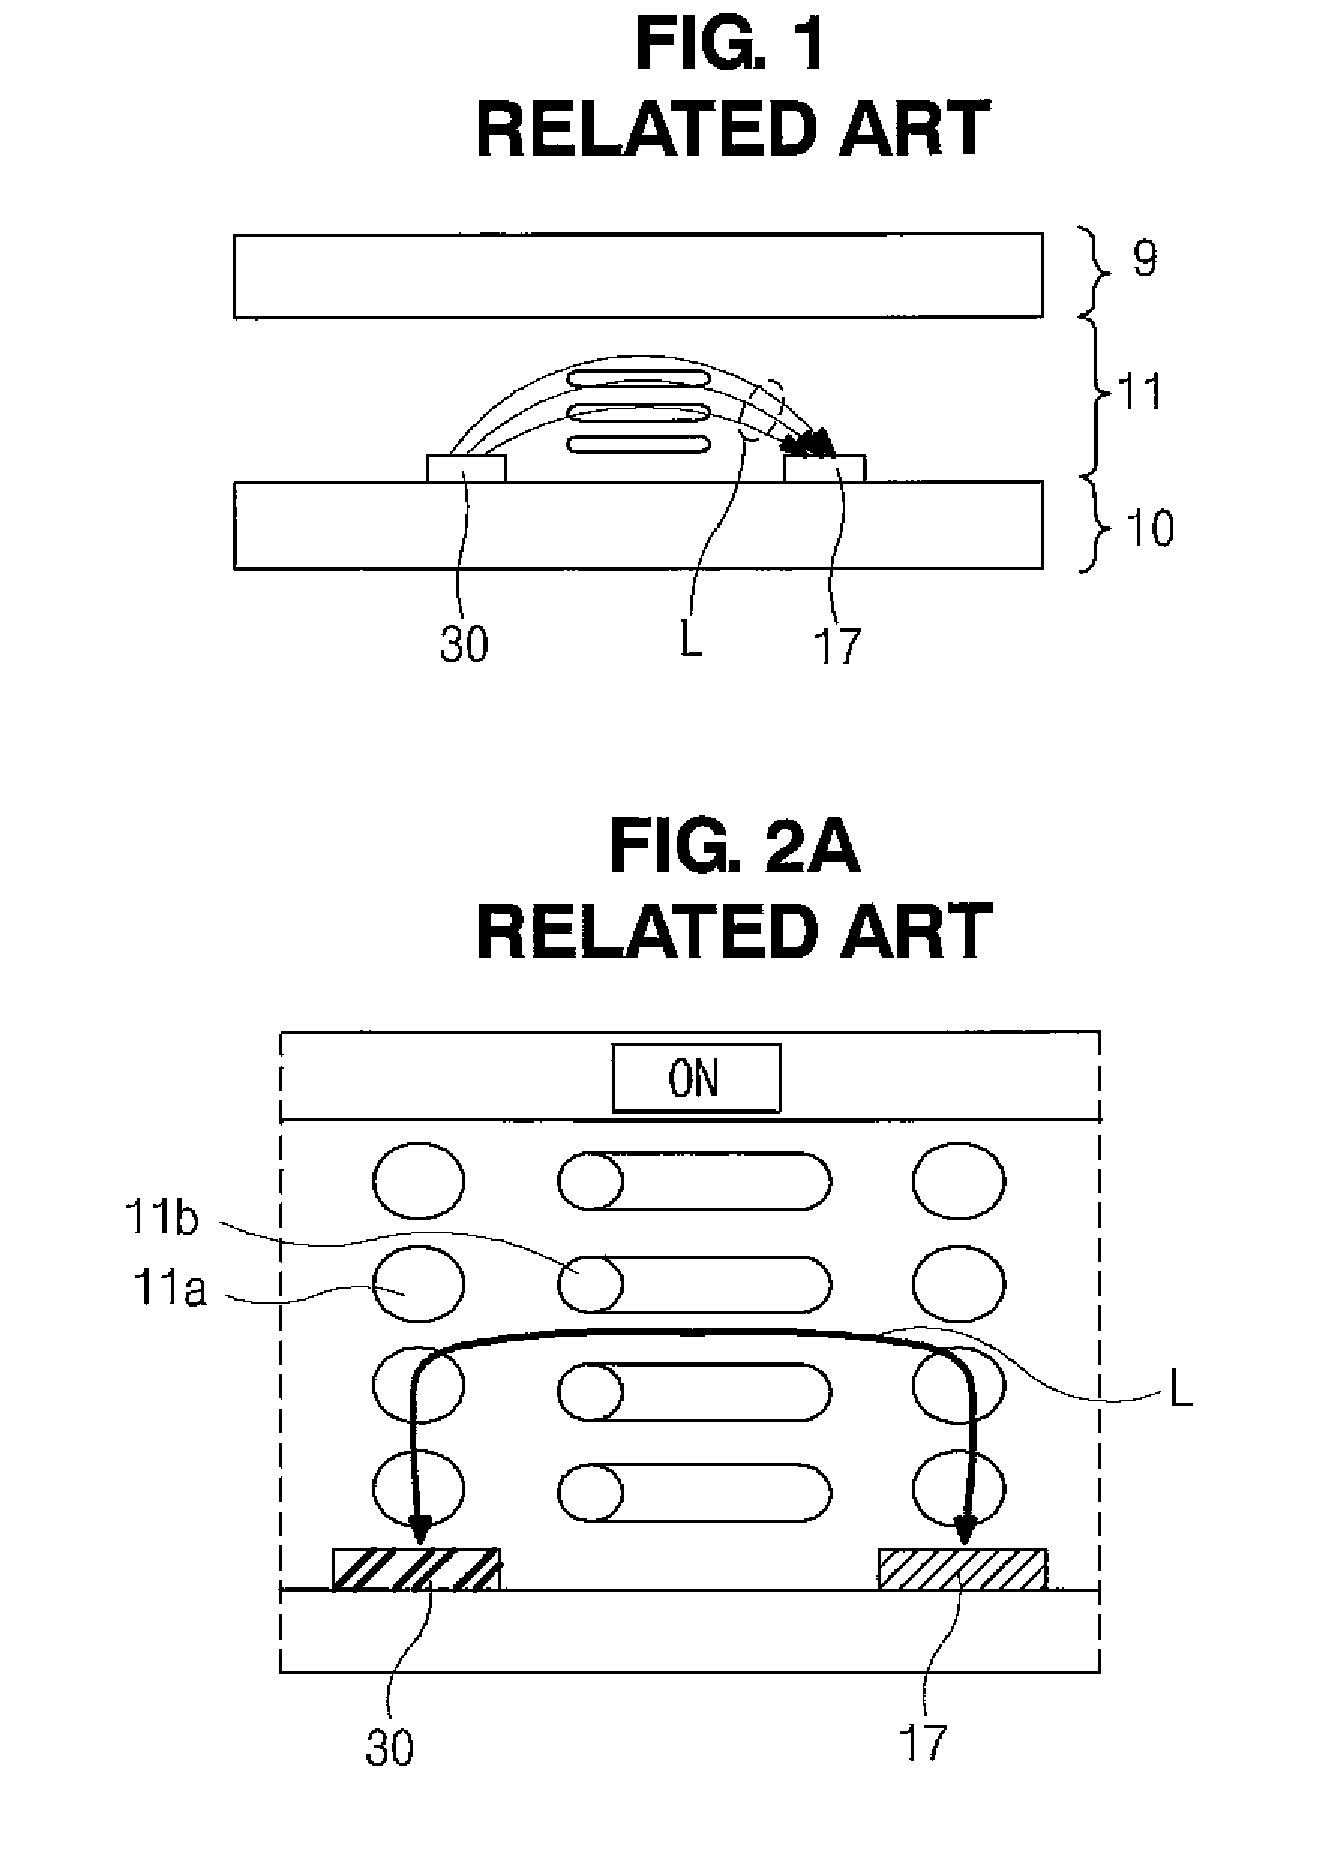 Array substrate for in-plane switching mode liquid crystal display device and method of fabricating the same